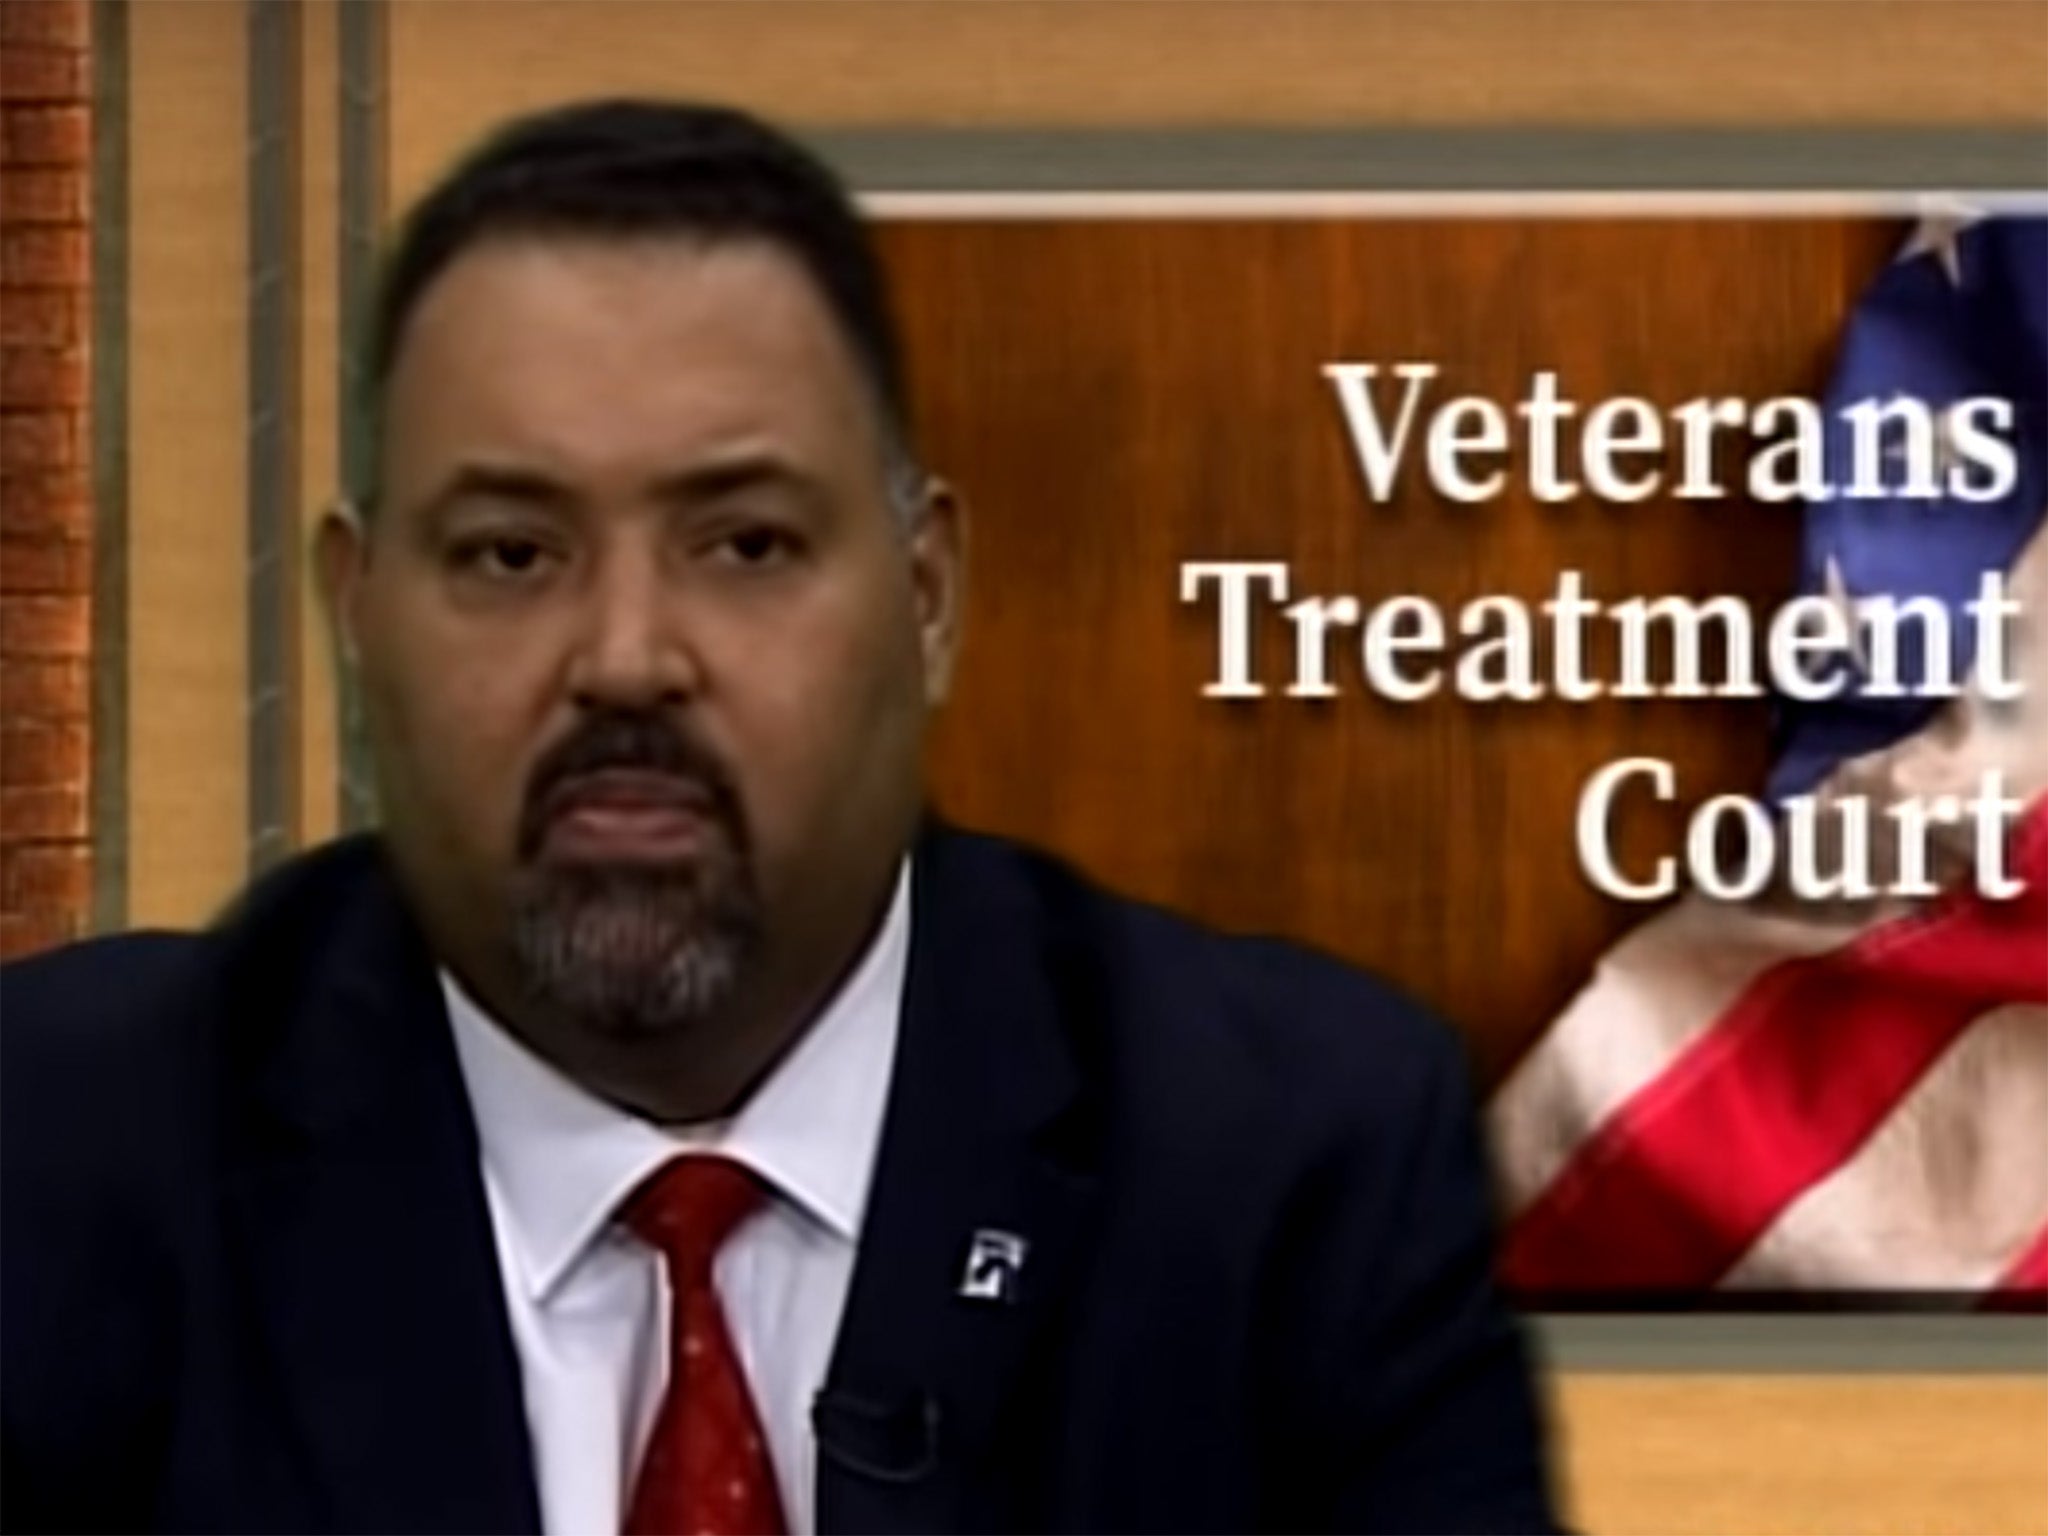 Judge Olivera spent the night in jail with a veteran